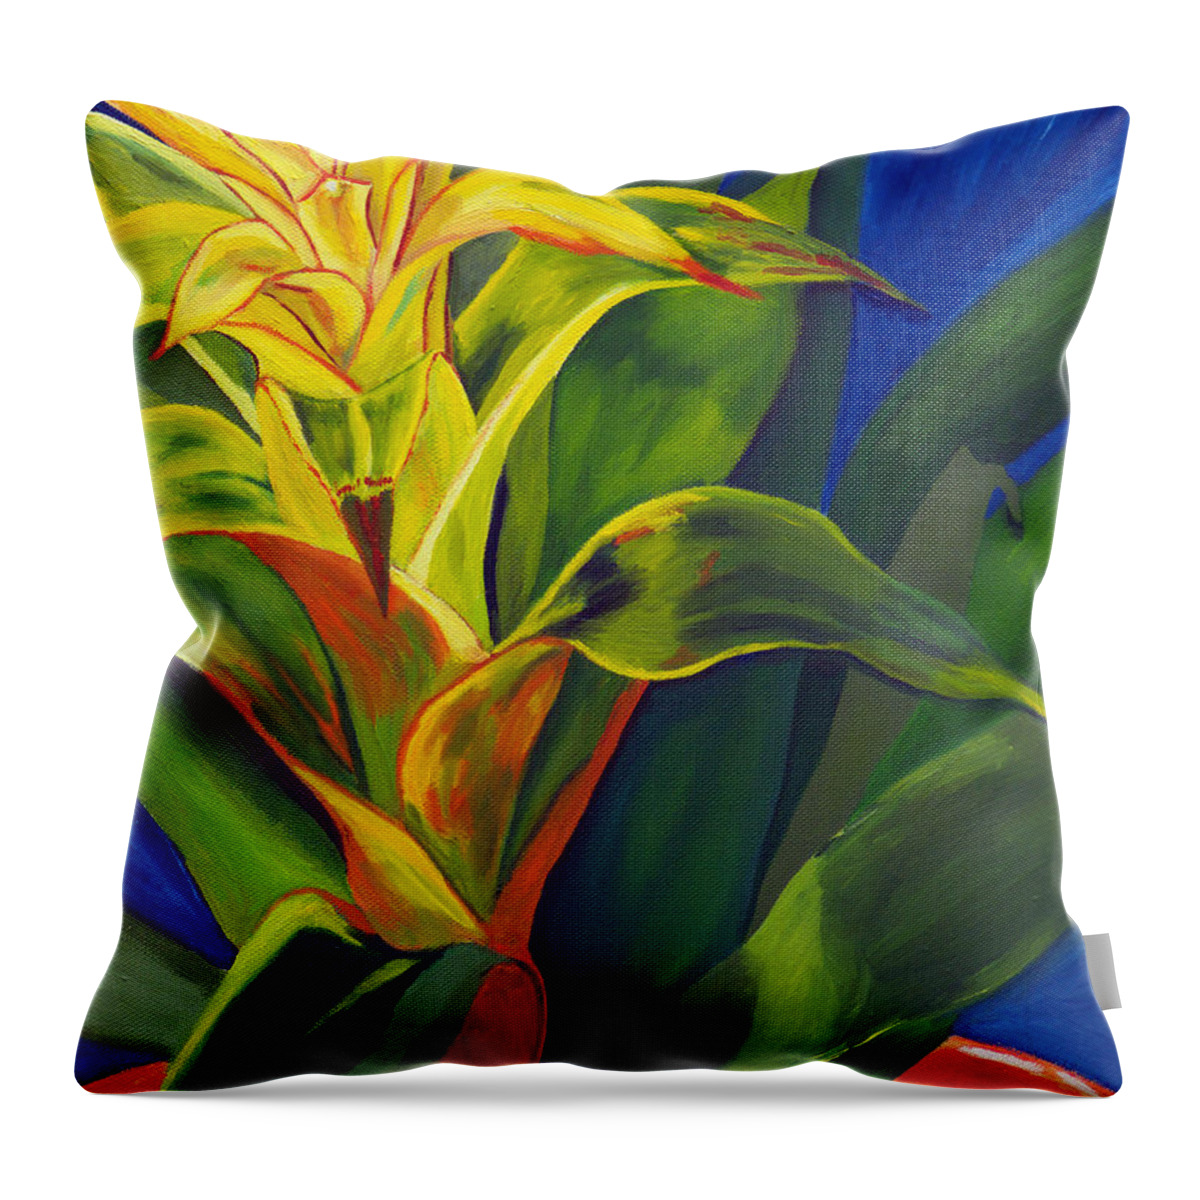 Warm And Cozy Throw Pillow featuring the painting Yellow Bromeliad by Annette M Stevenson